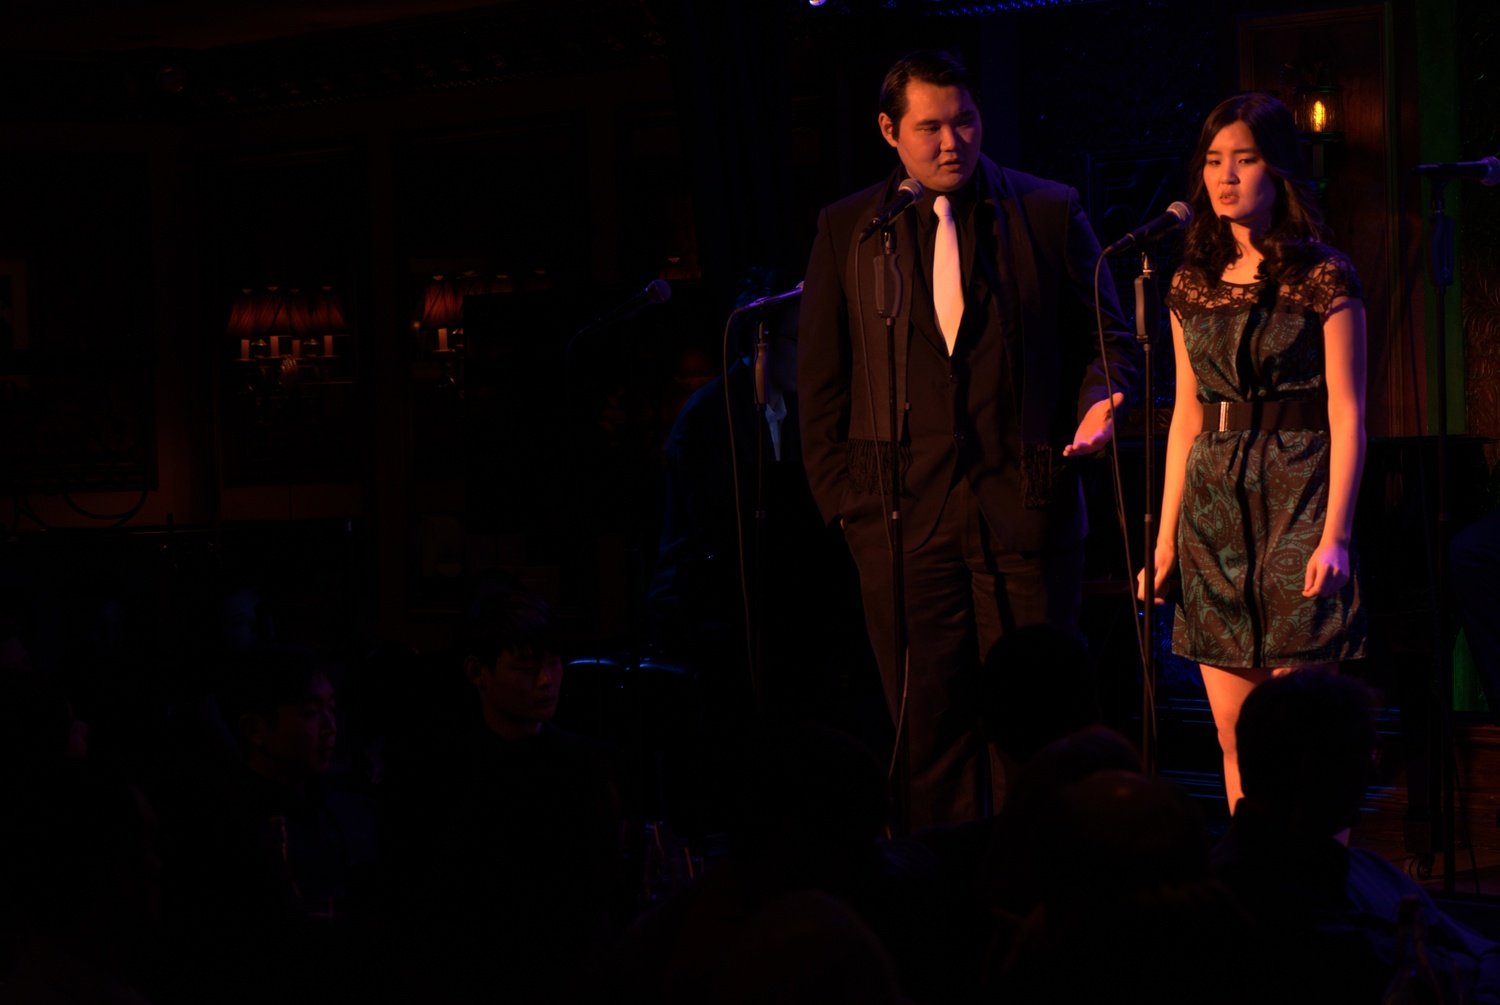 Some of the pictures from 54 Below concert. 2